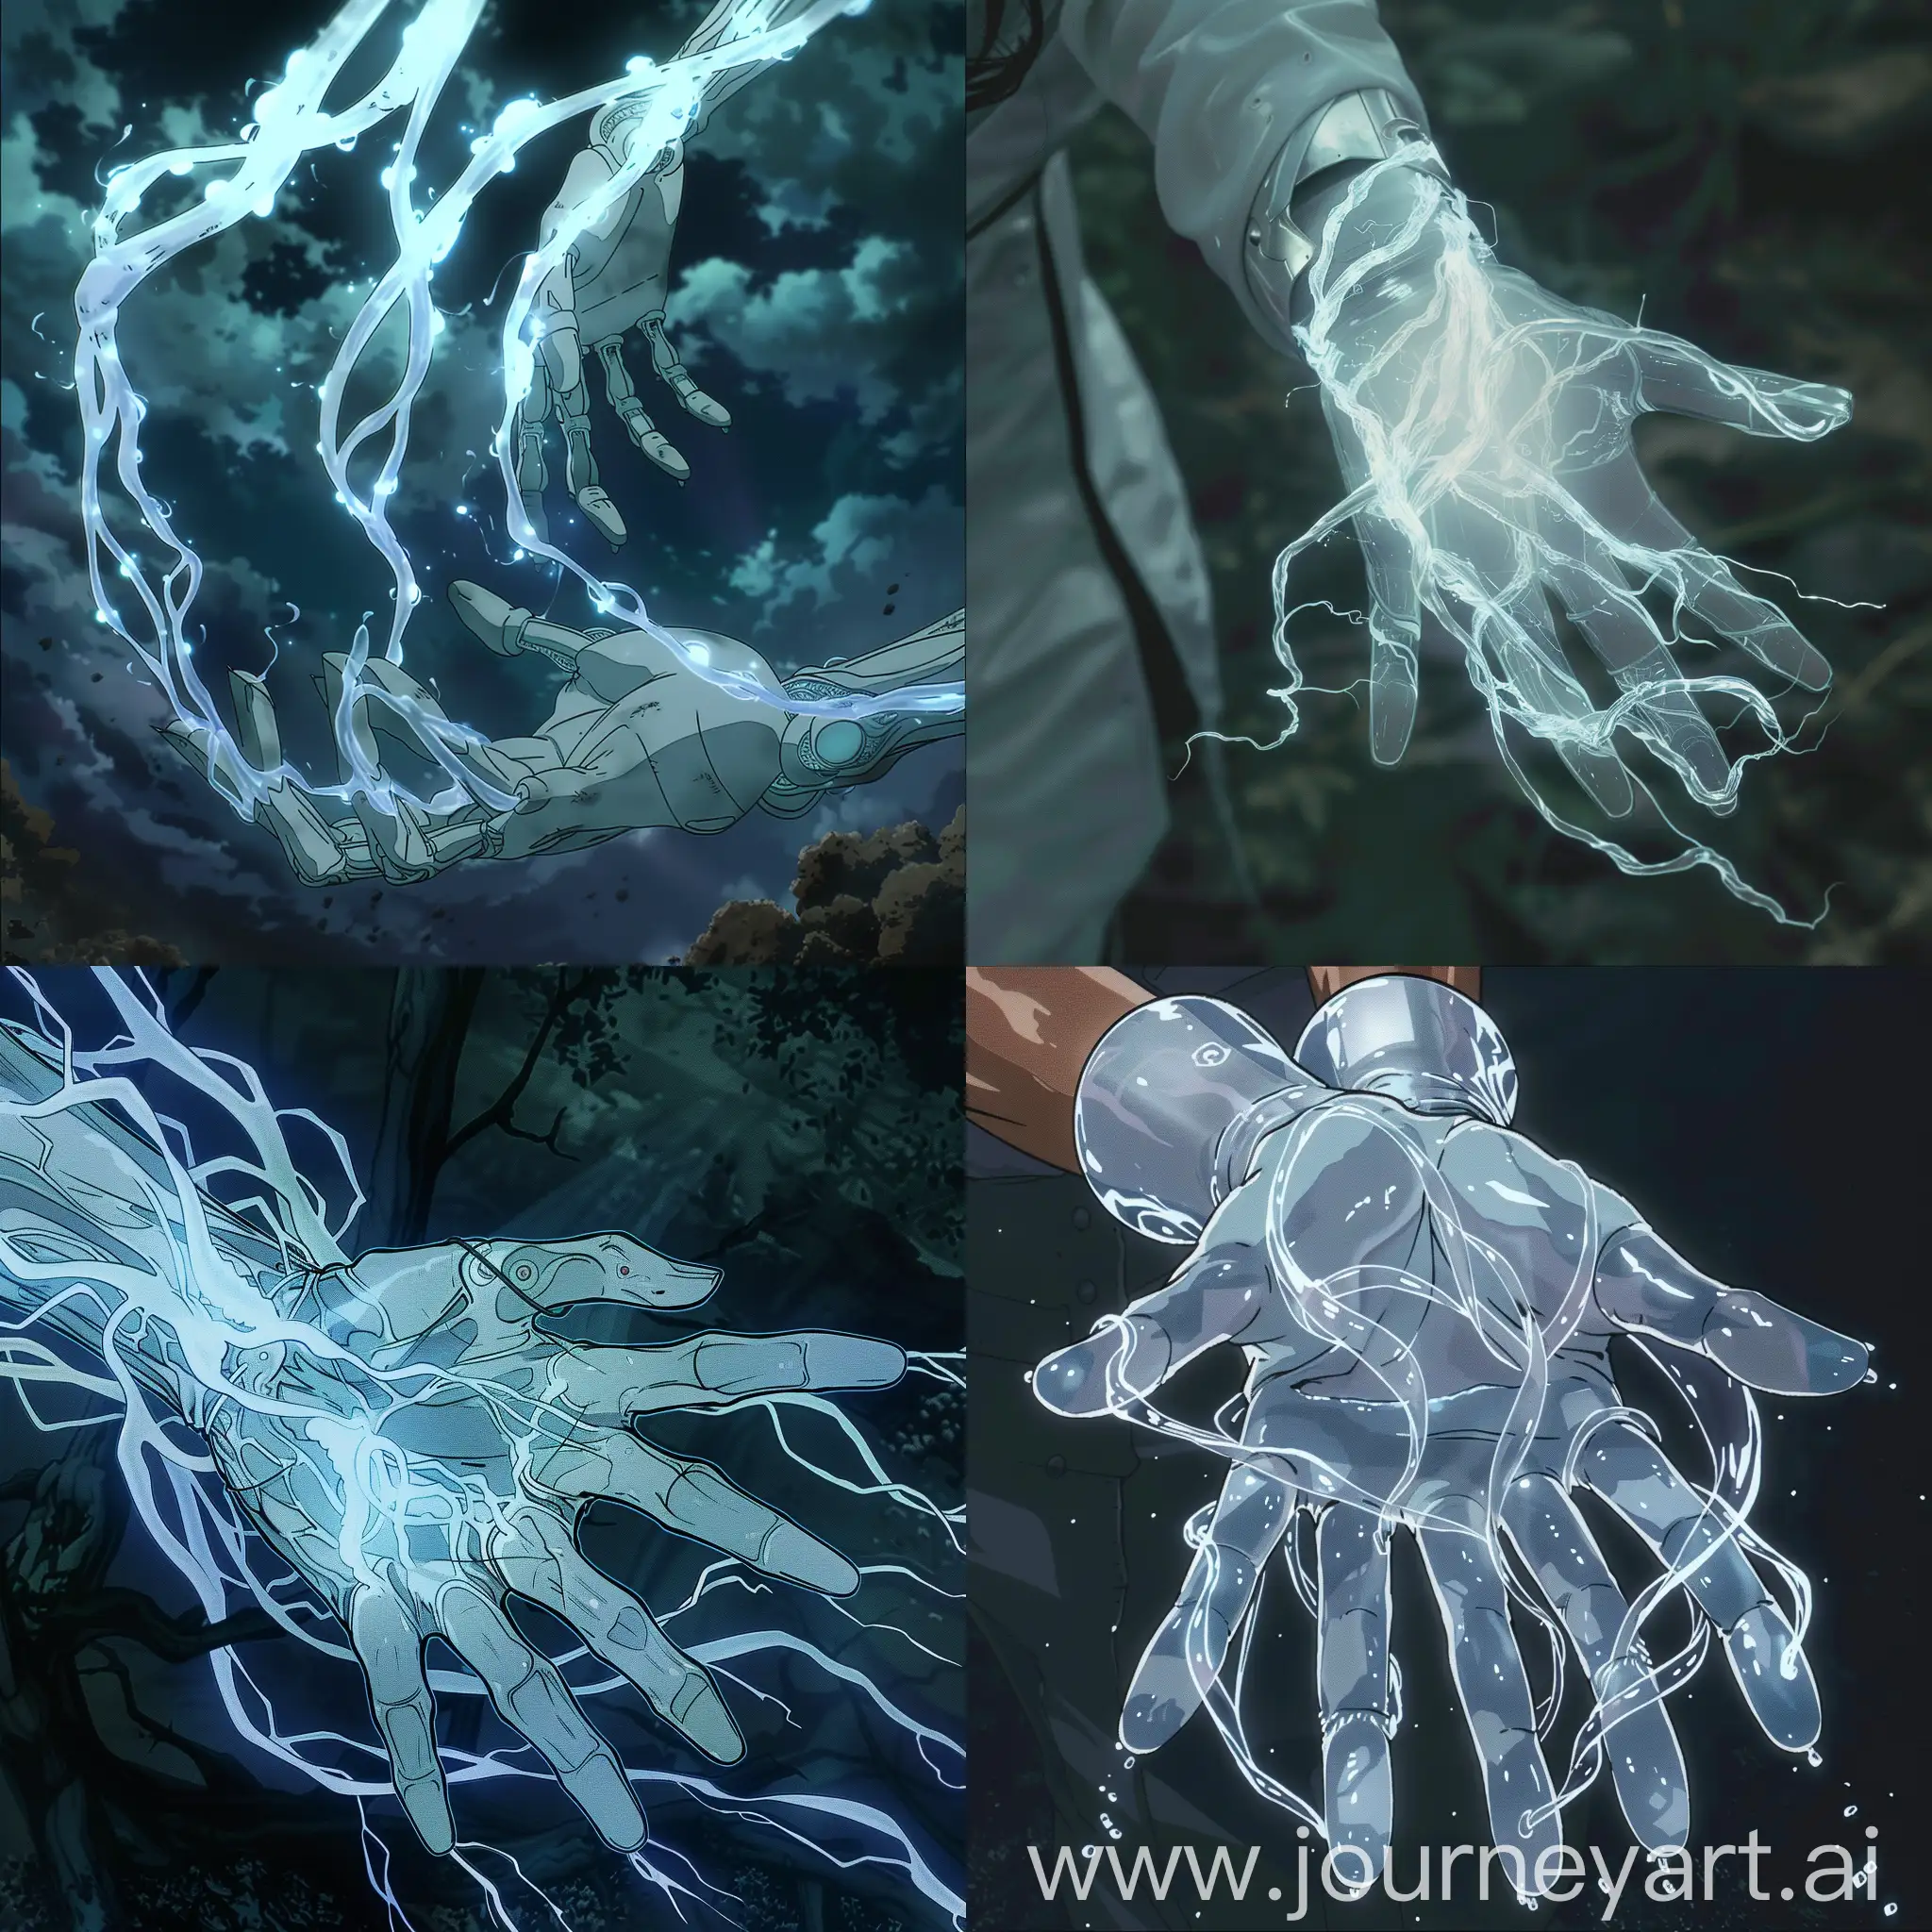 2D anime the Symbiont's tendrils emit a translucent, shimmering forcefield around the user's hands. This forcefield can extend and retract rapidly, allowing the user to reach out and manipulate objects or terrain from a distance as if by an unseen hand.